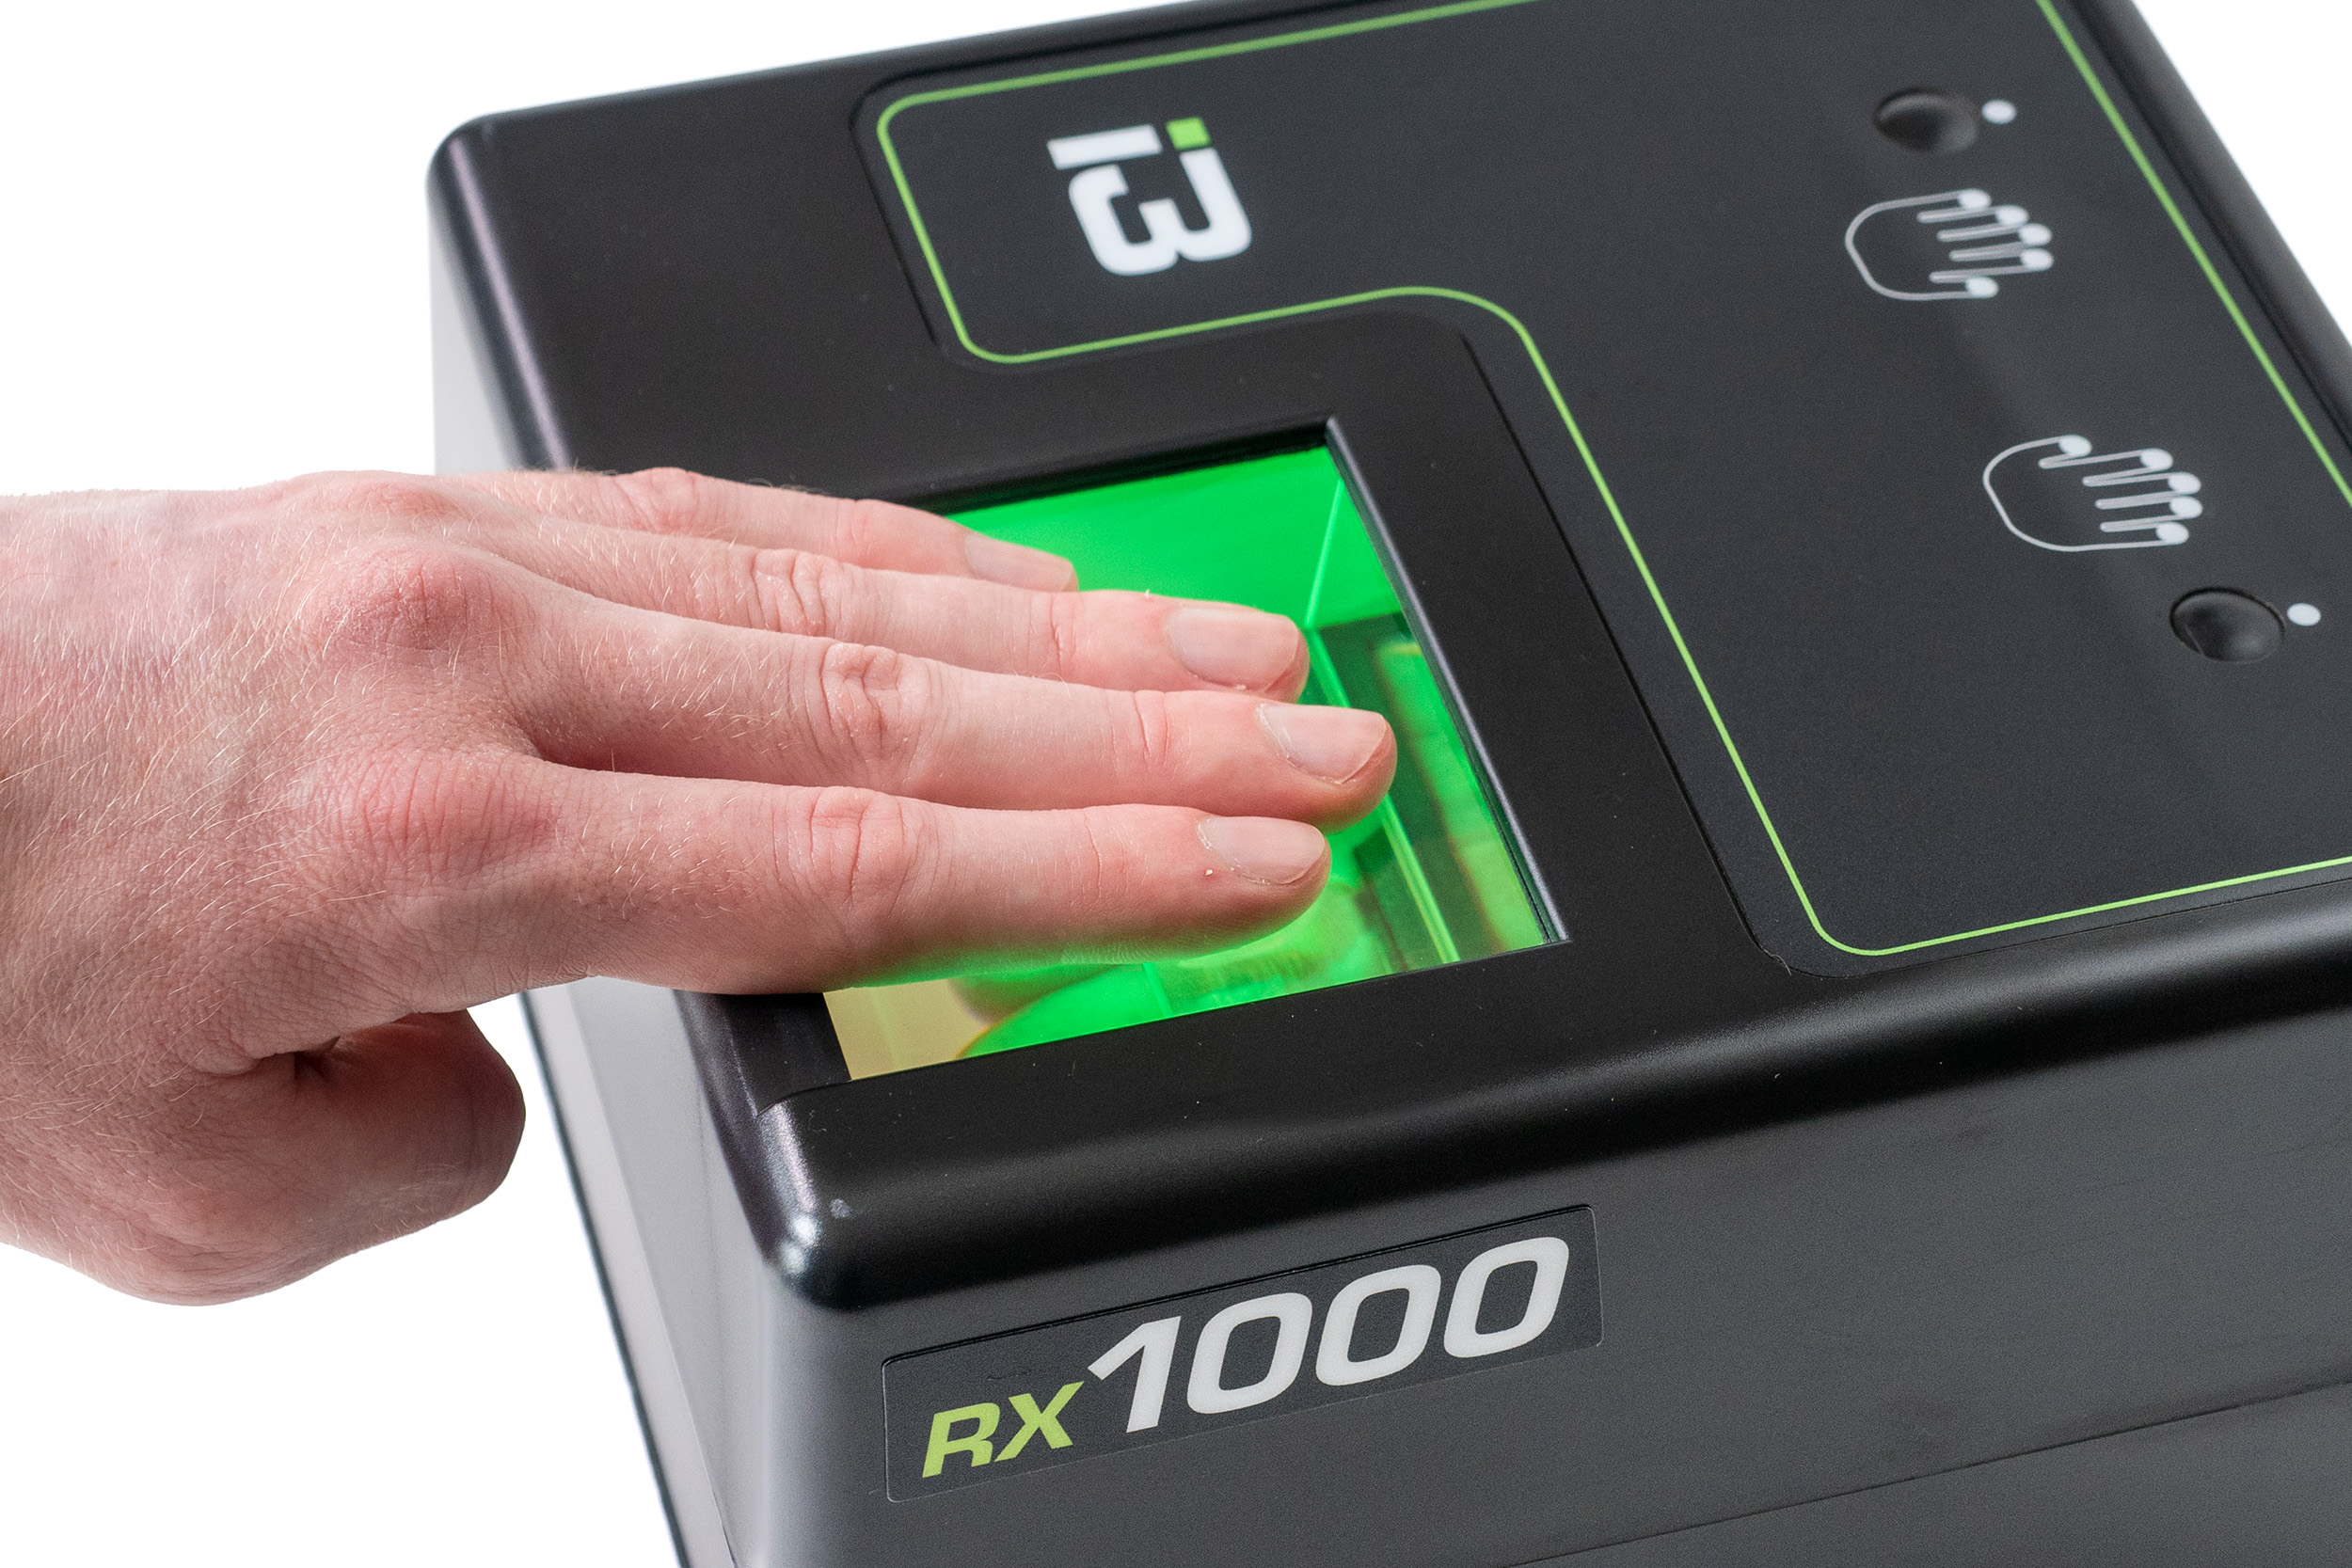 A photo of 4 fingers being scanned on the RX1000